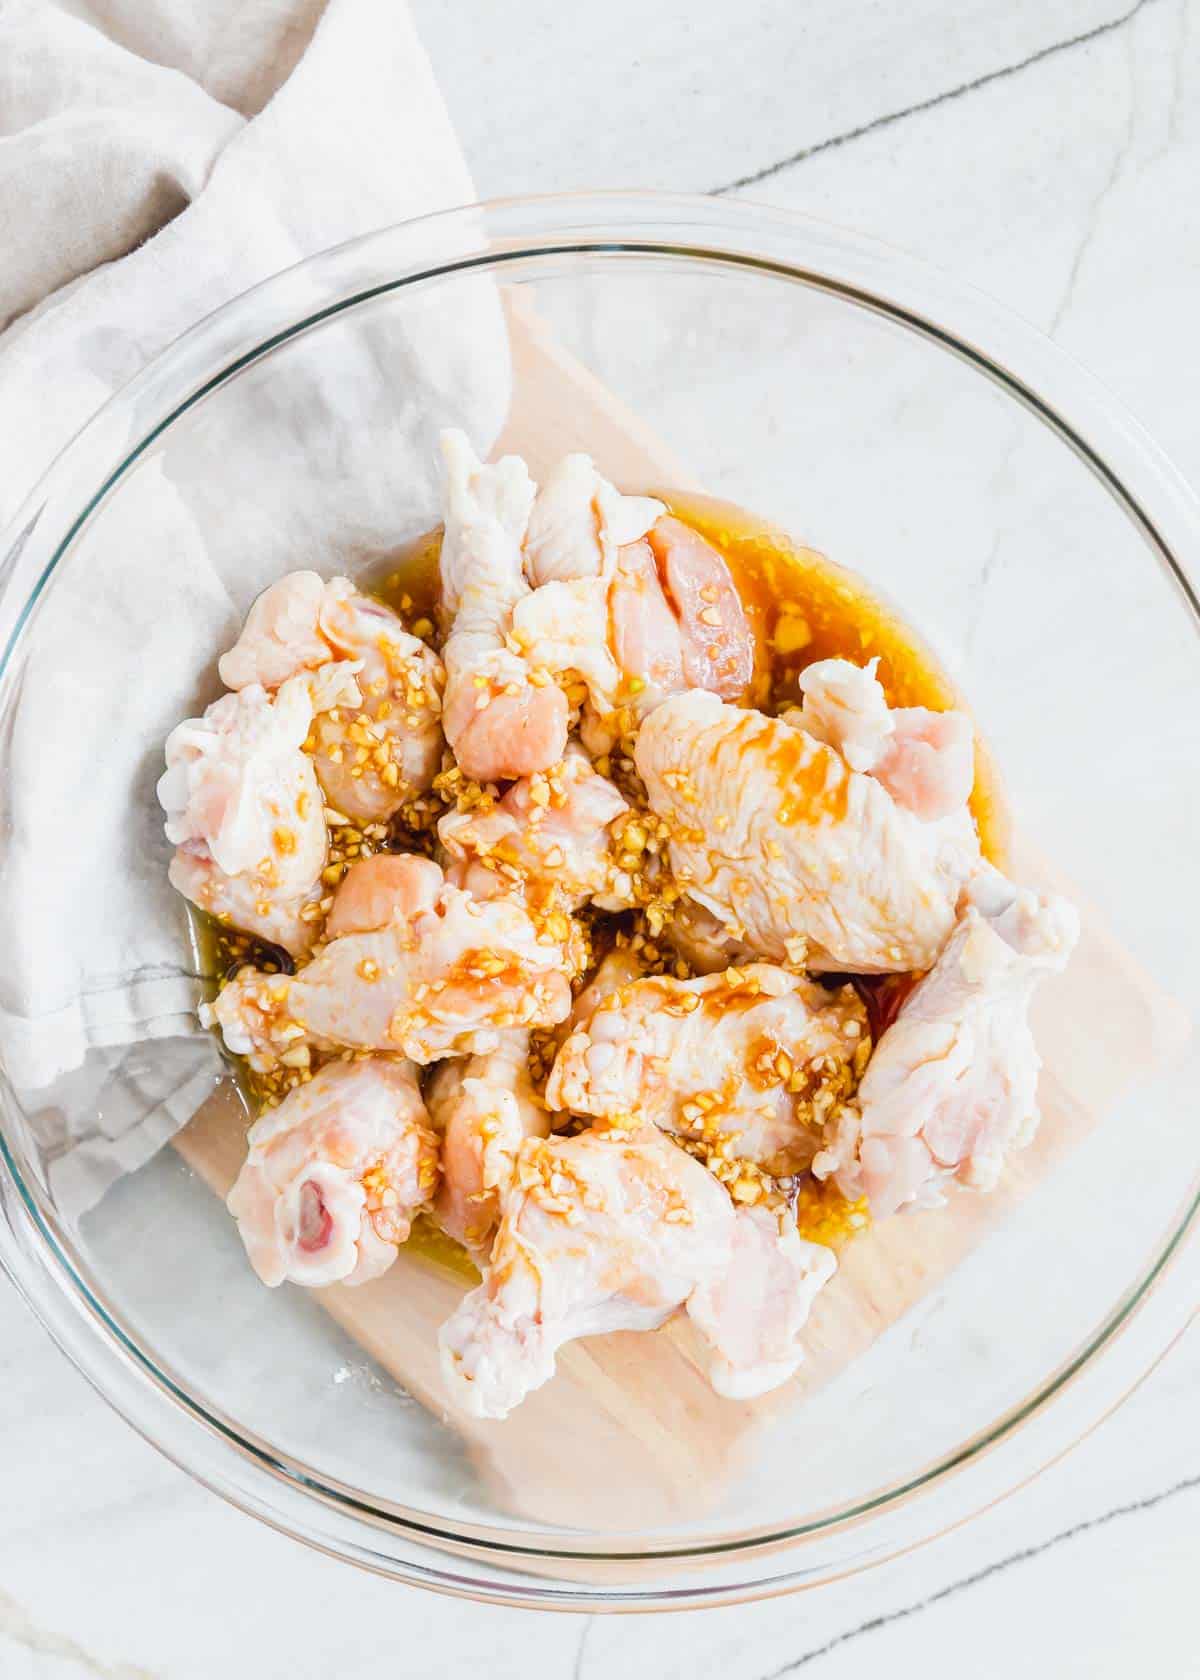 Raw chicken wings marinating in a glass bowl.